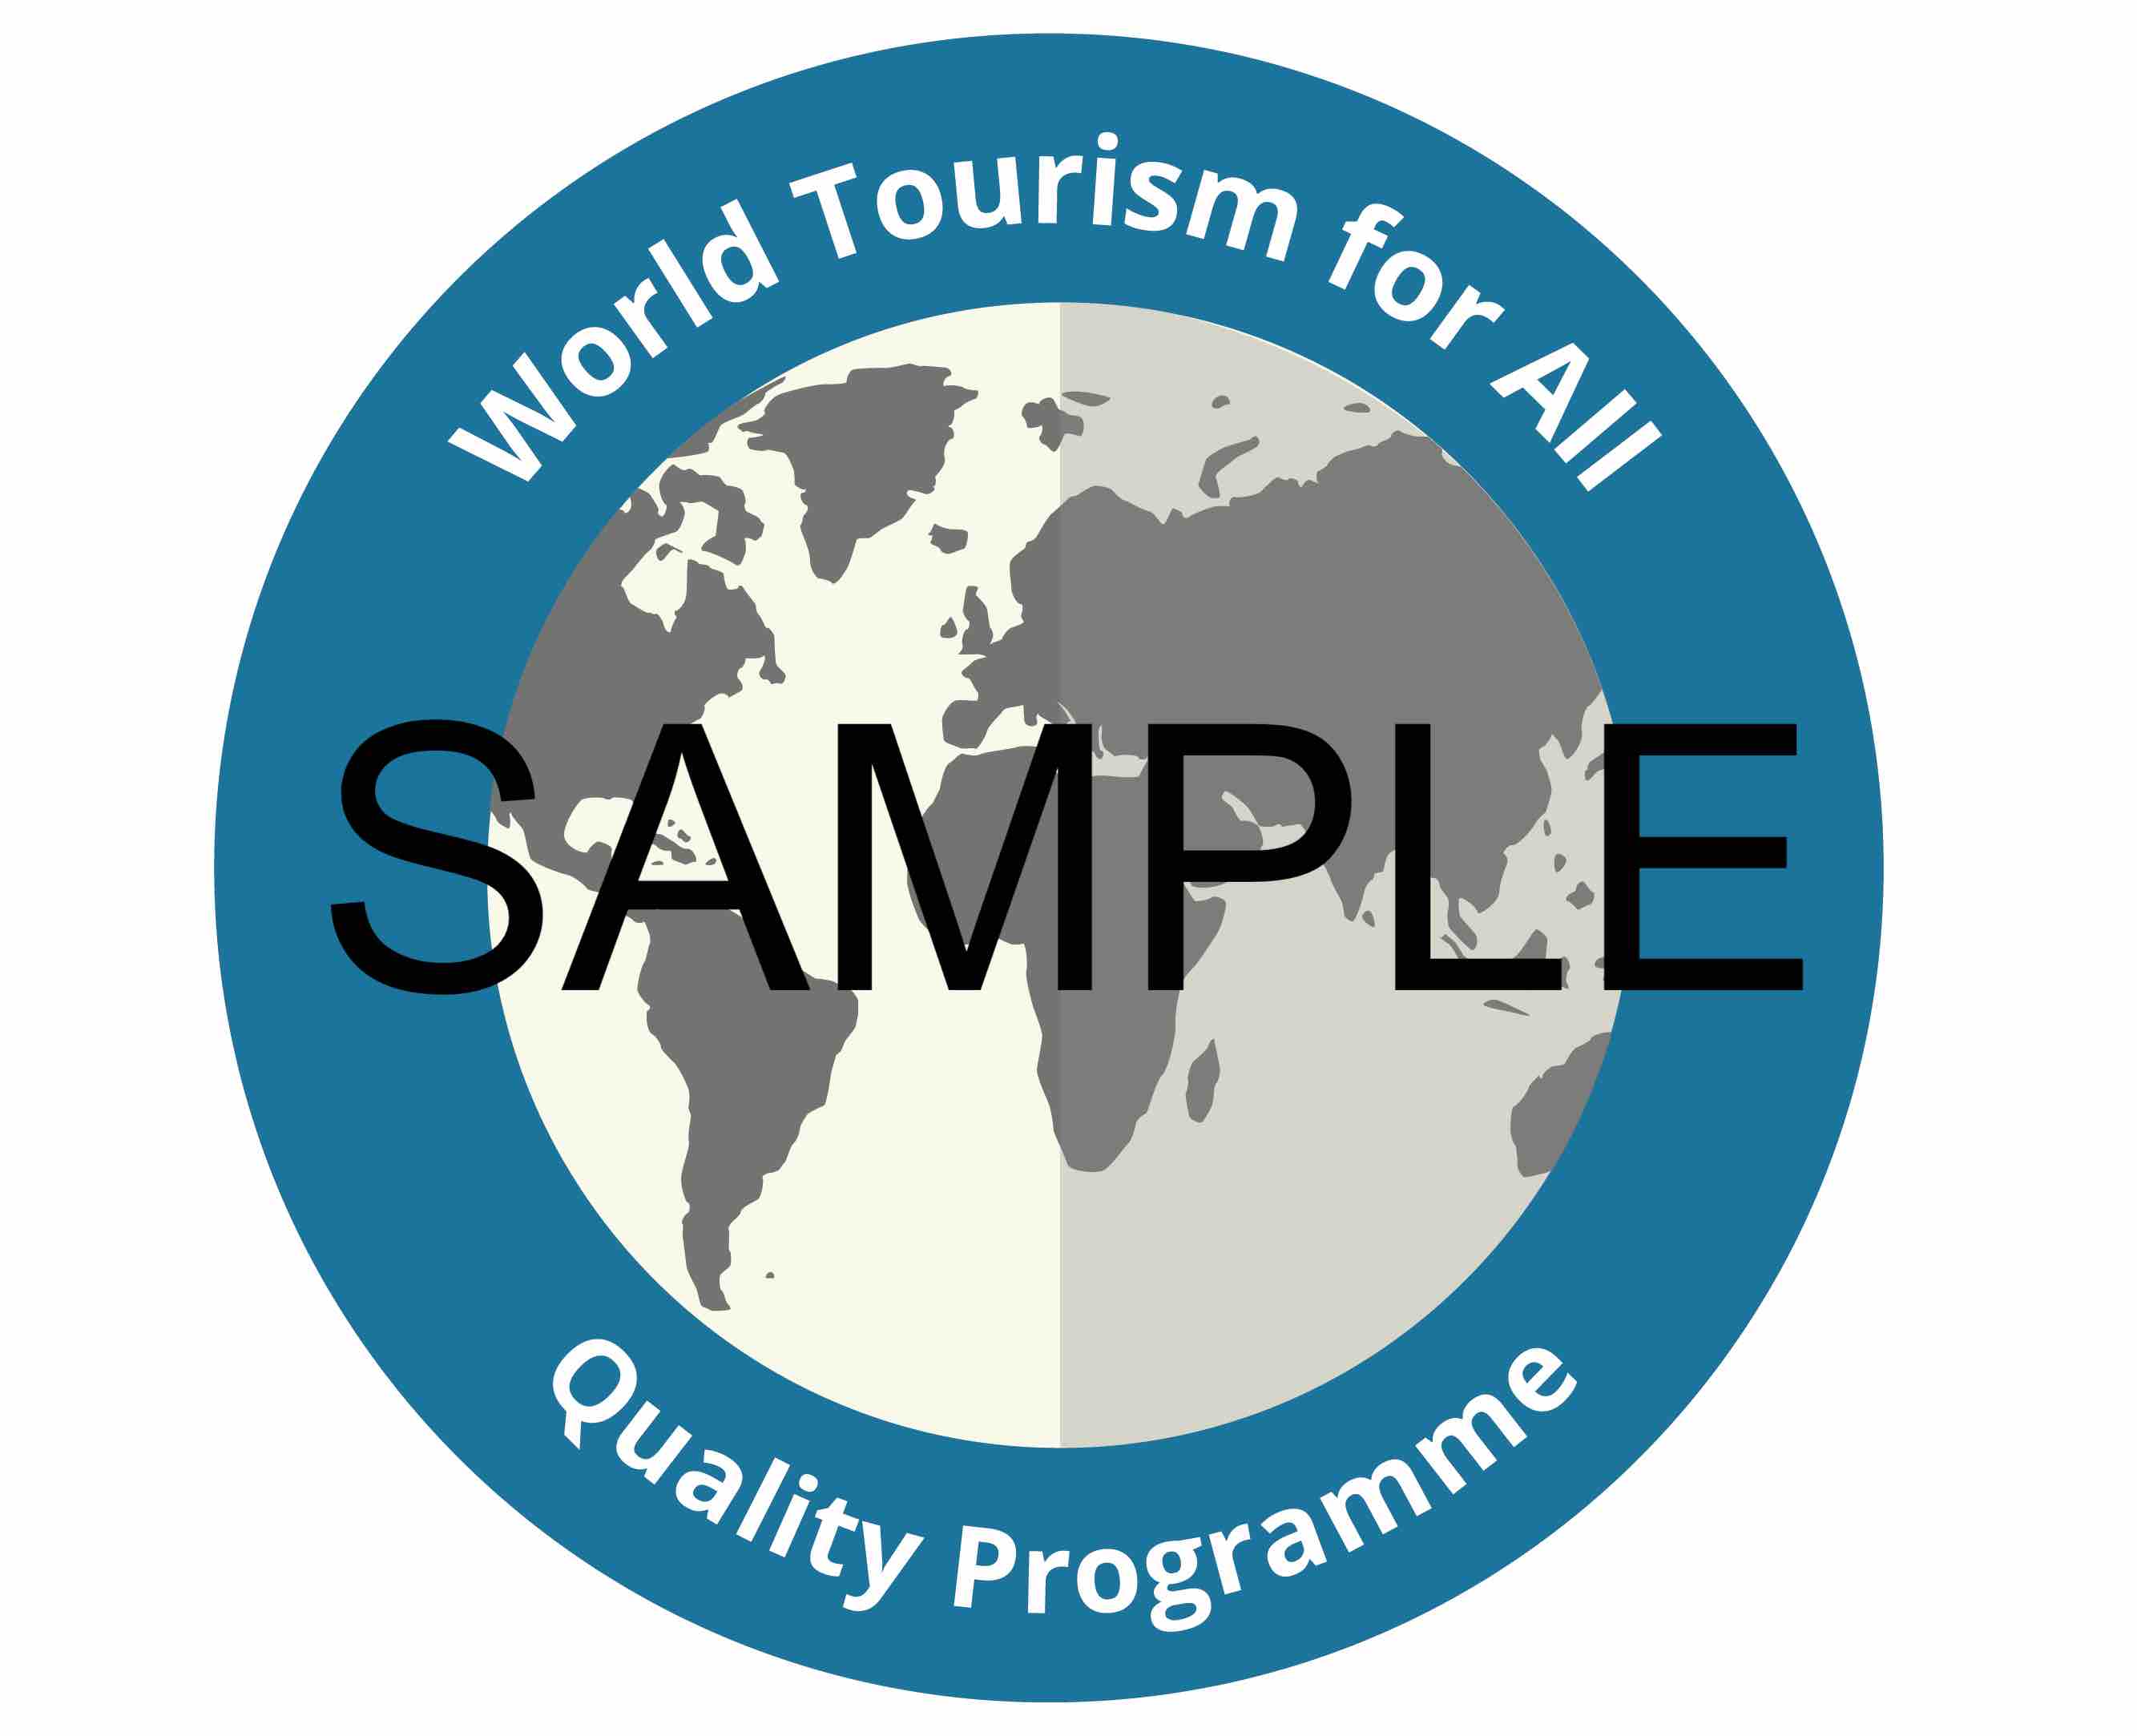 Seal of Accreditation, World Tourism for All Quality Programme   